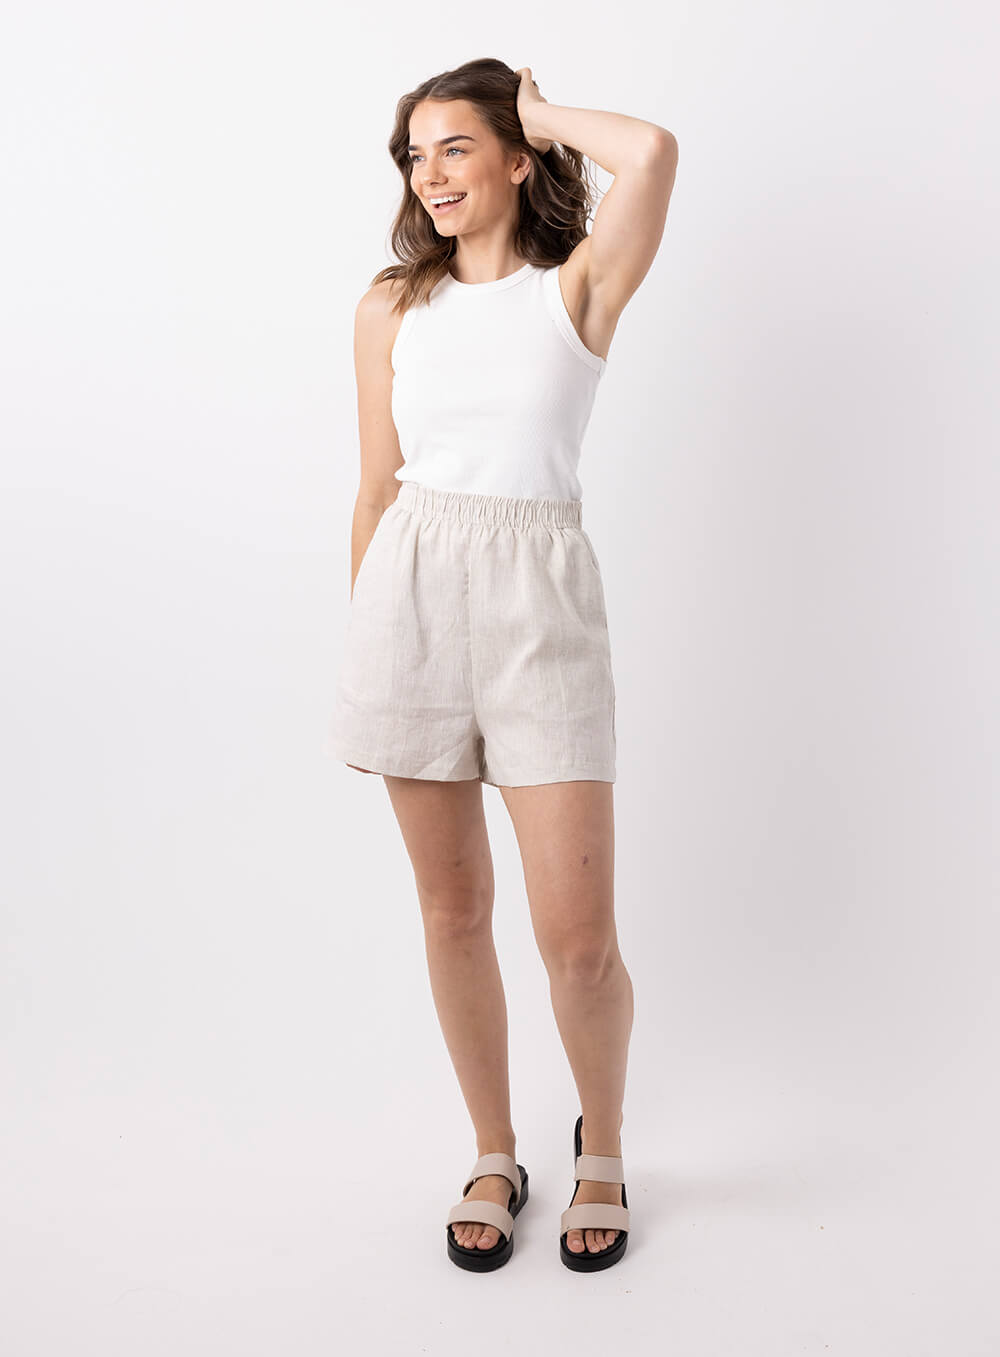 The Ali Linen Short in biege is 100% breathable lien, mid thigh in length with 2 side pockets, no back pockets, elastic waistband and designed to be worn high wiasted and loose fitting